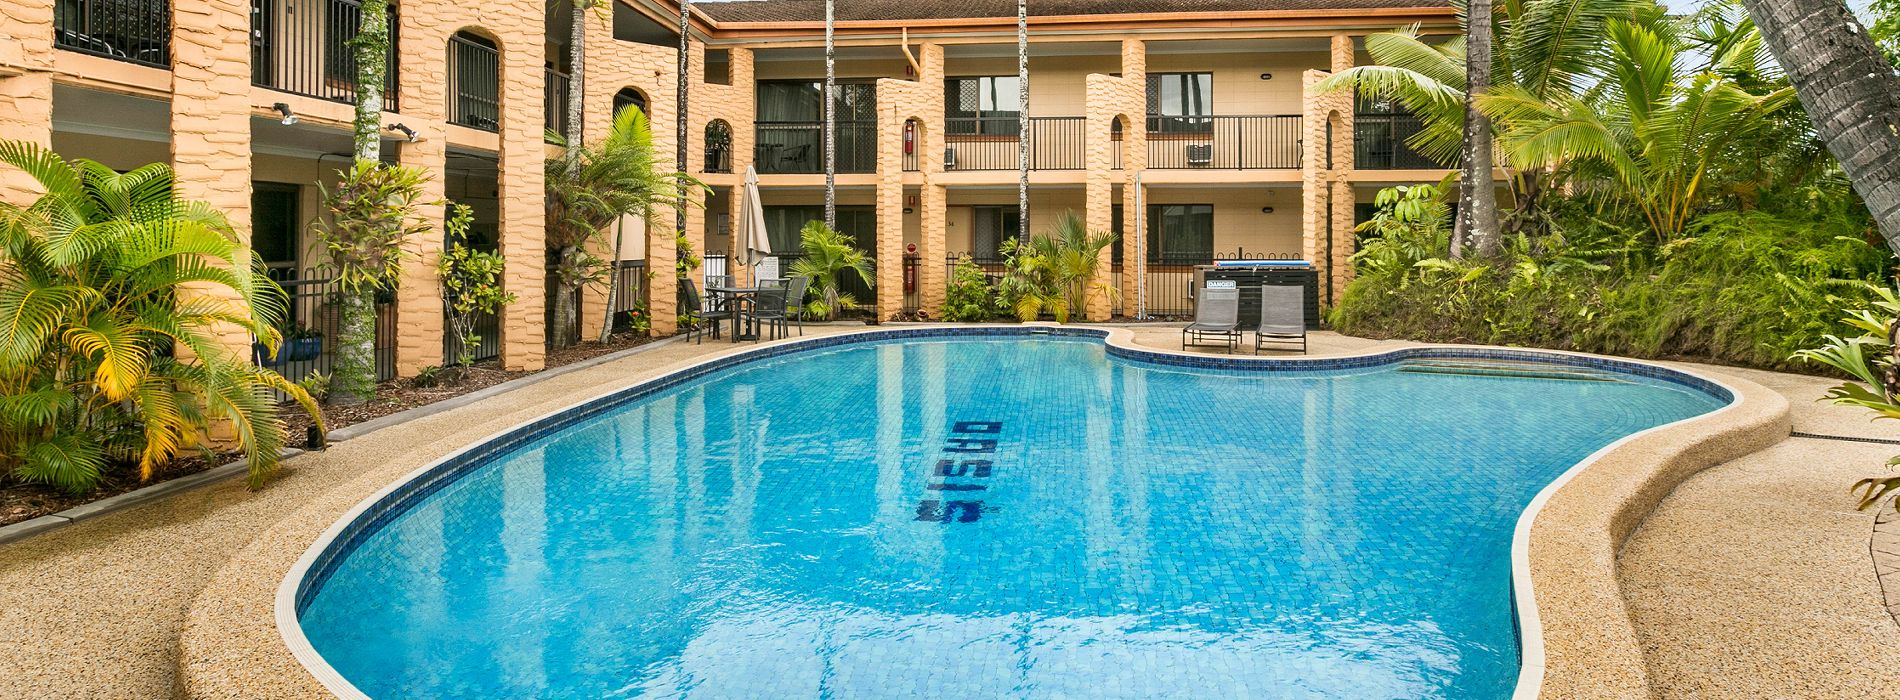 Cairns Holiday Apartments Oasis Inn Cairns Pool